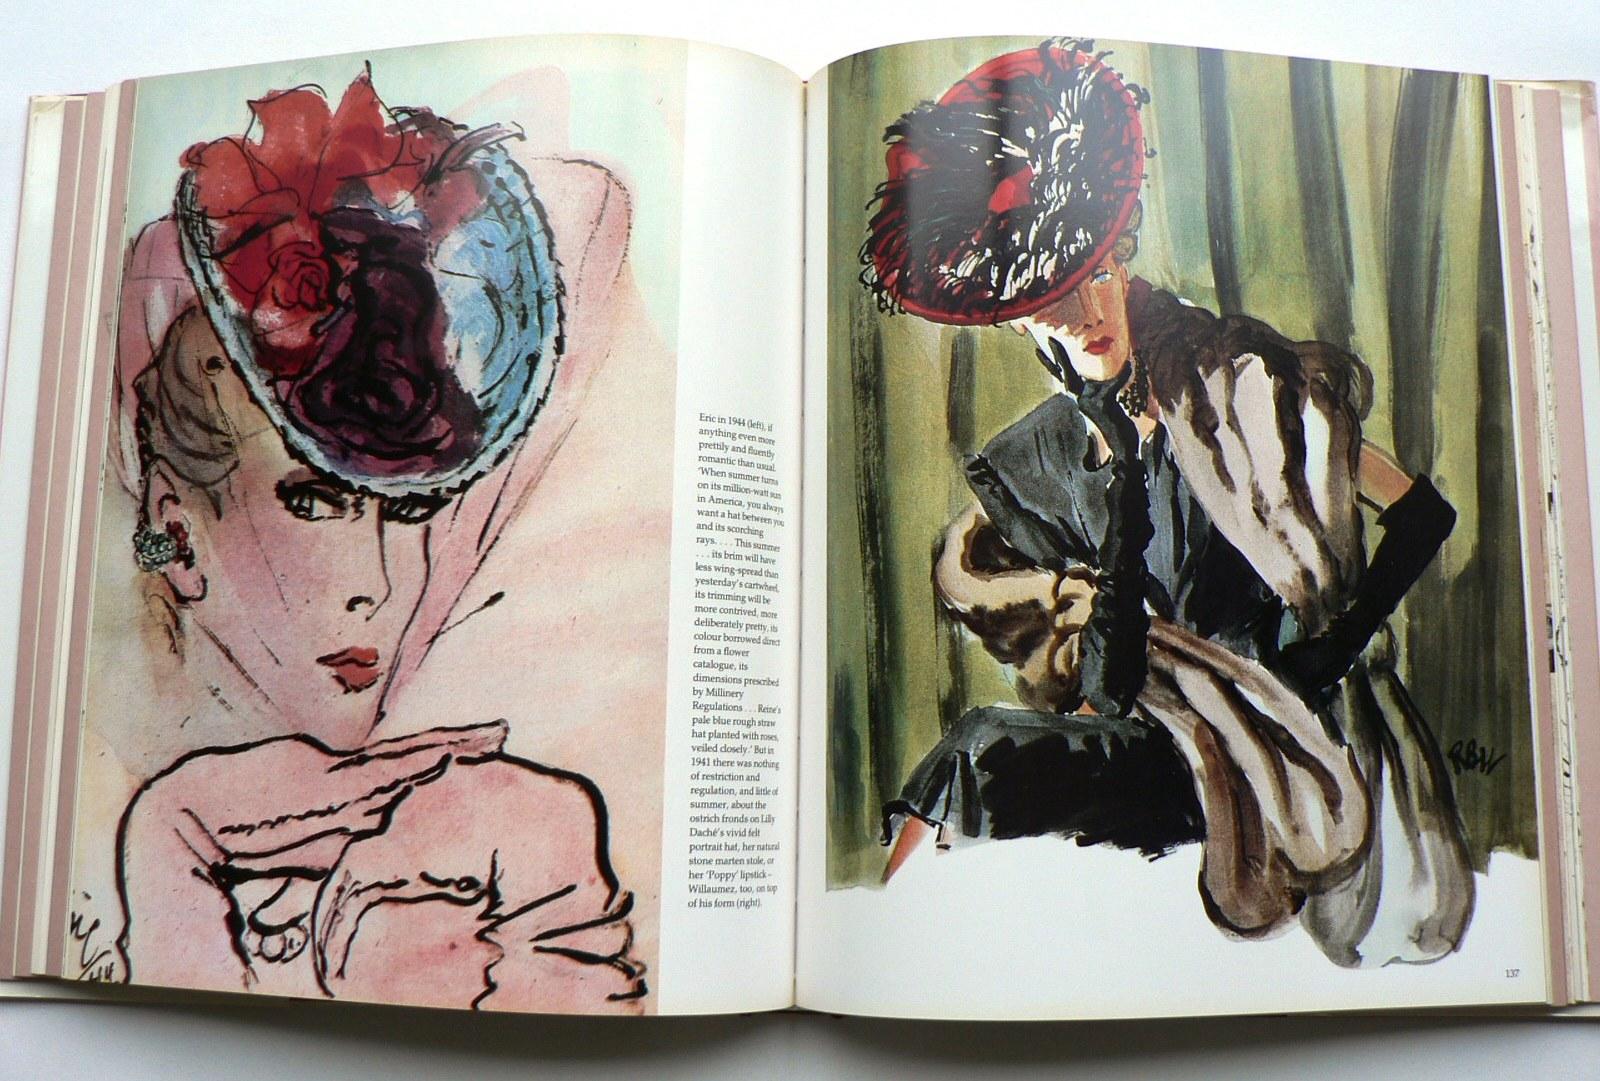 Fashion Drawing in Vogue